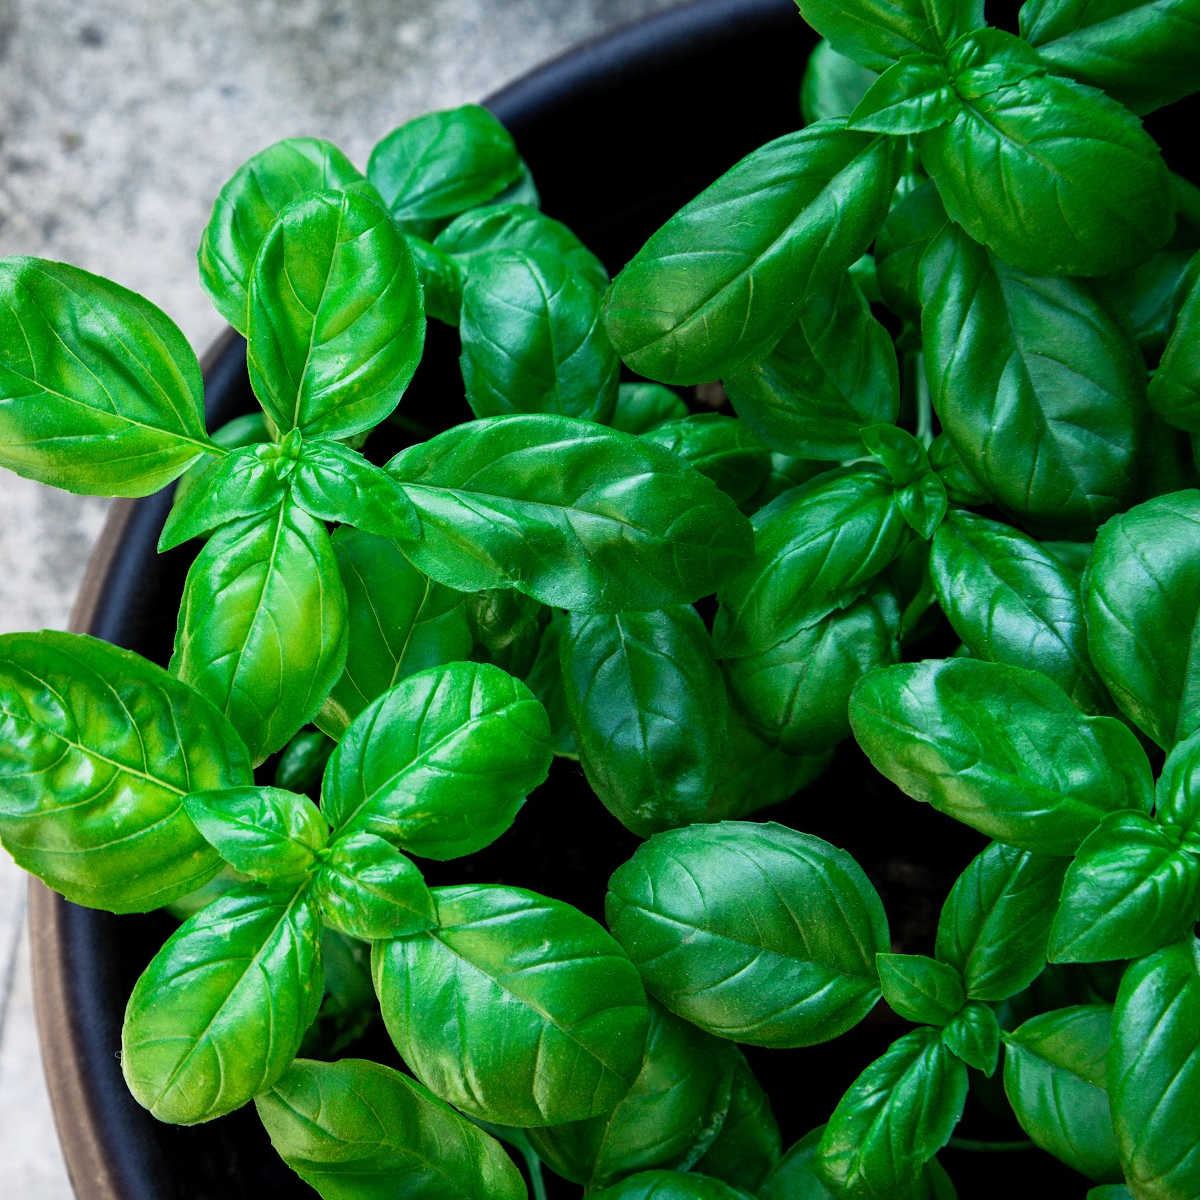 Top down view of basil growing in planter.